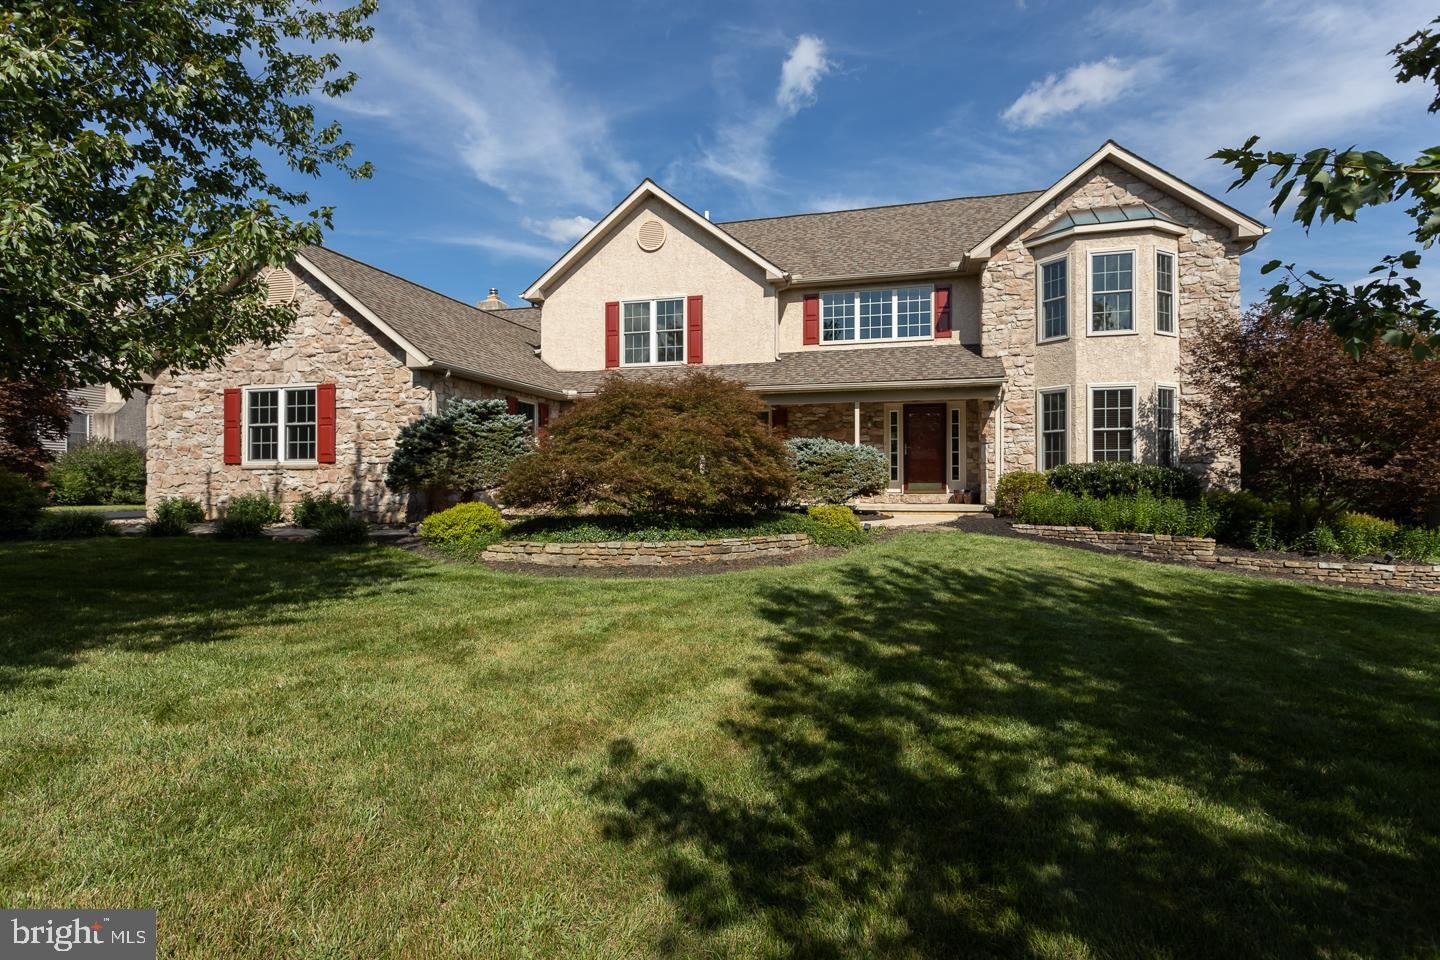 115 N Iroquois Lane, Chester Springs, PA 19425 | MLS PACT514218 | Listing  Information | Long & Foster